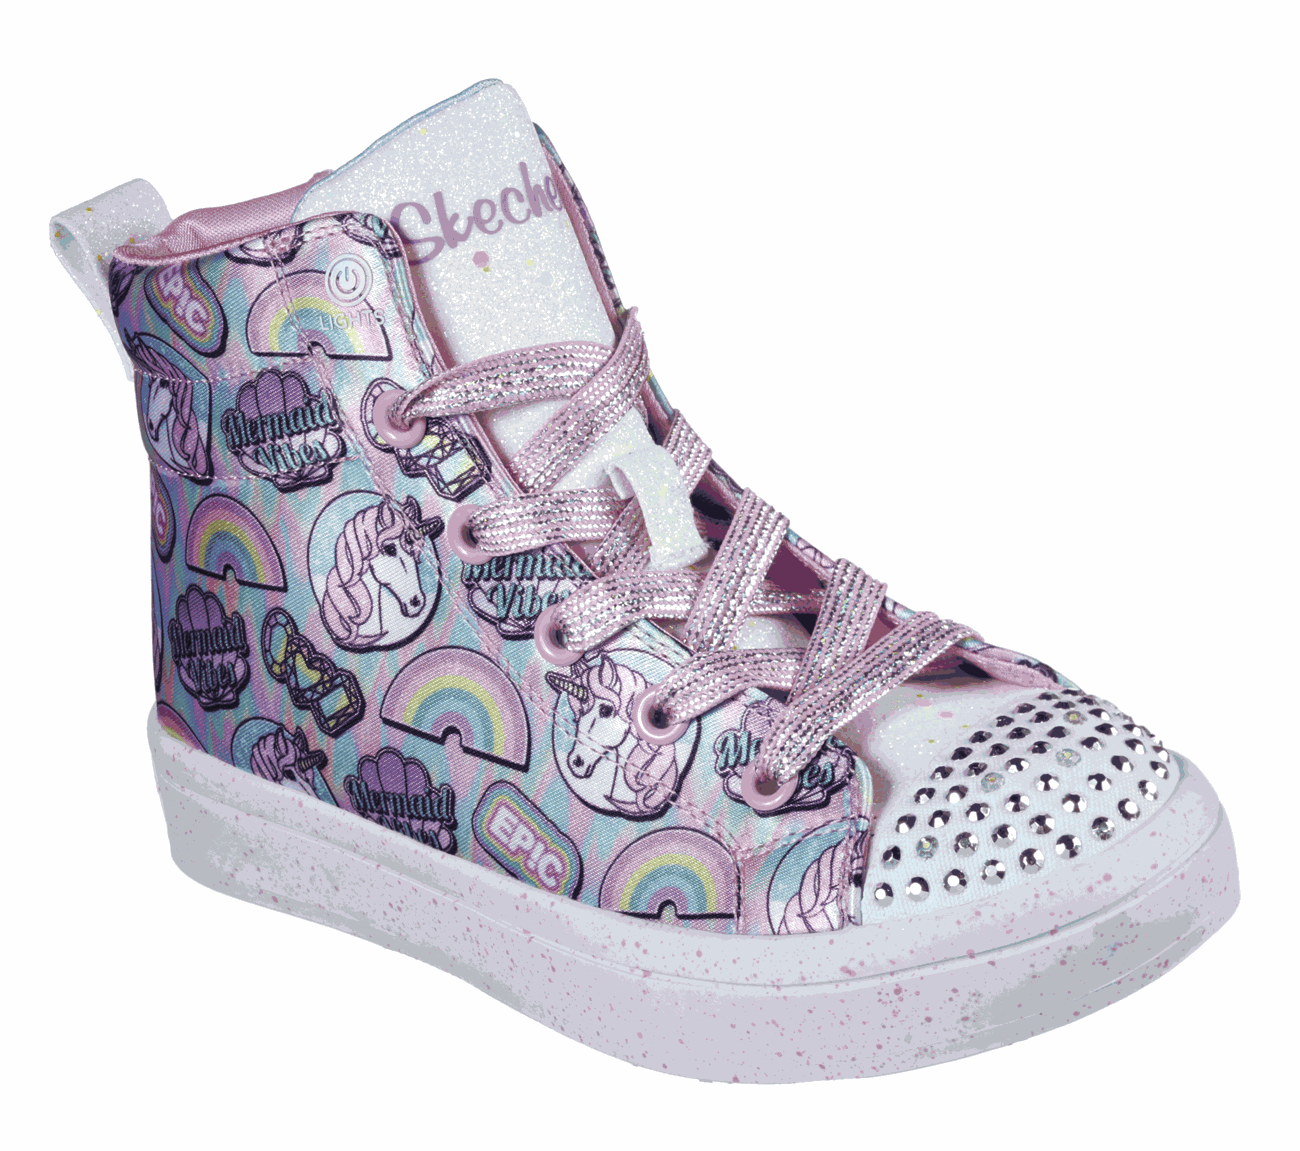 Buy SKECHERS Twinkle Toes: Twi-Lites - Unicorn Vibes S-Lights Shoes